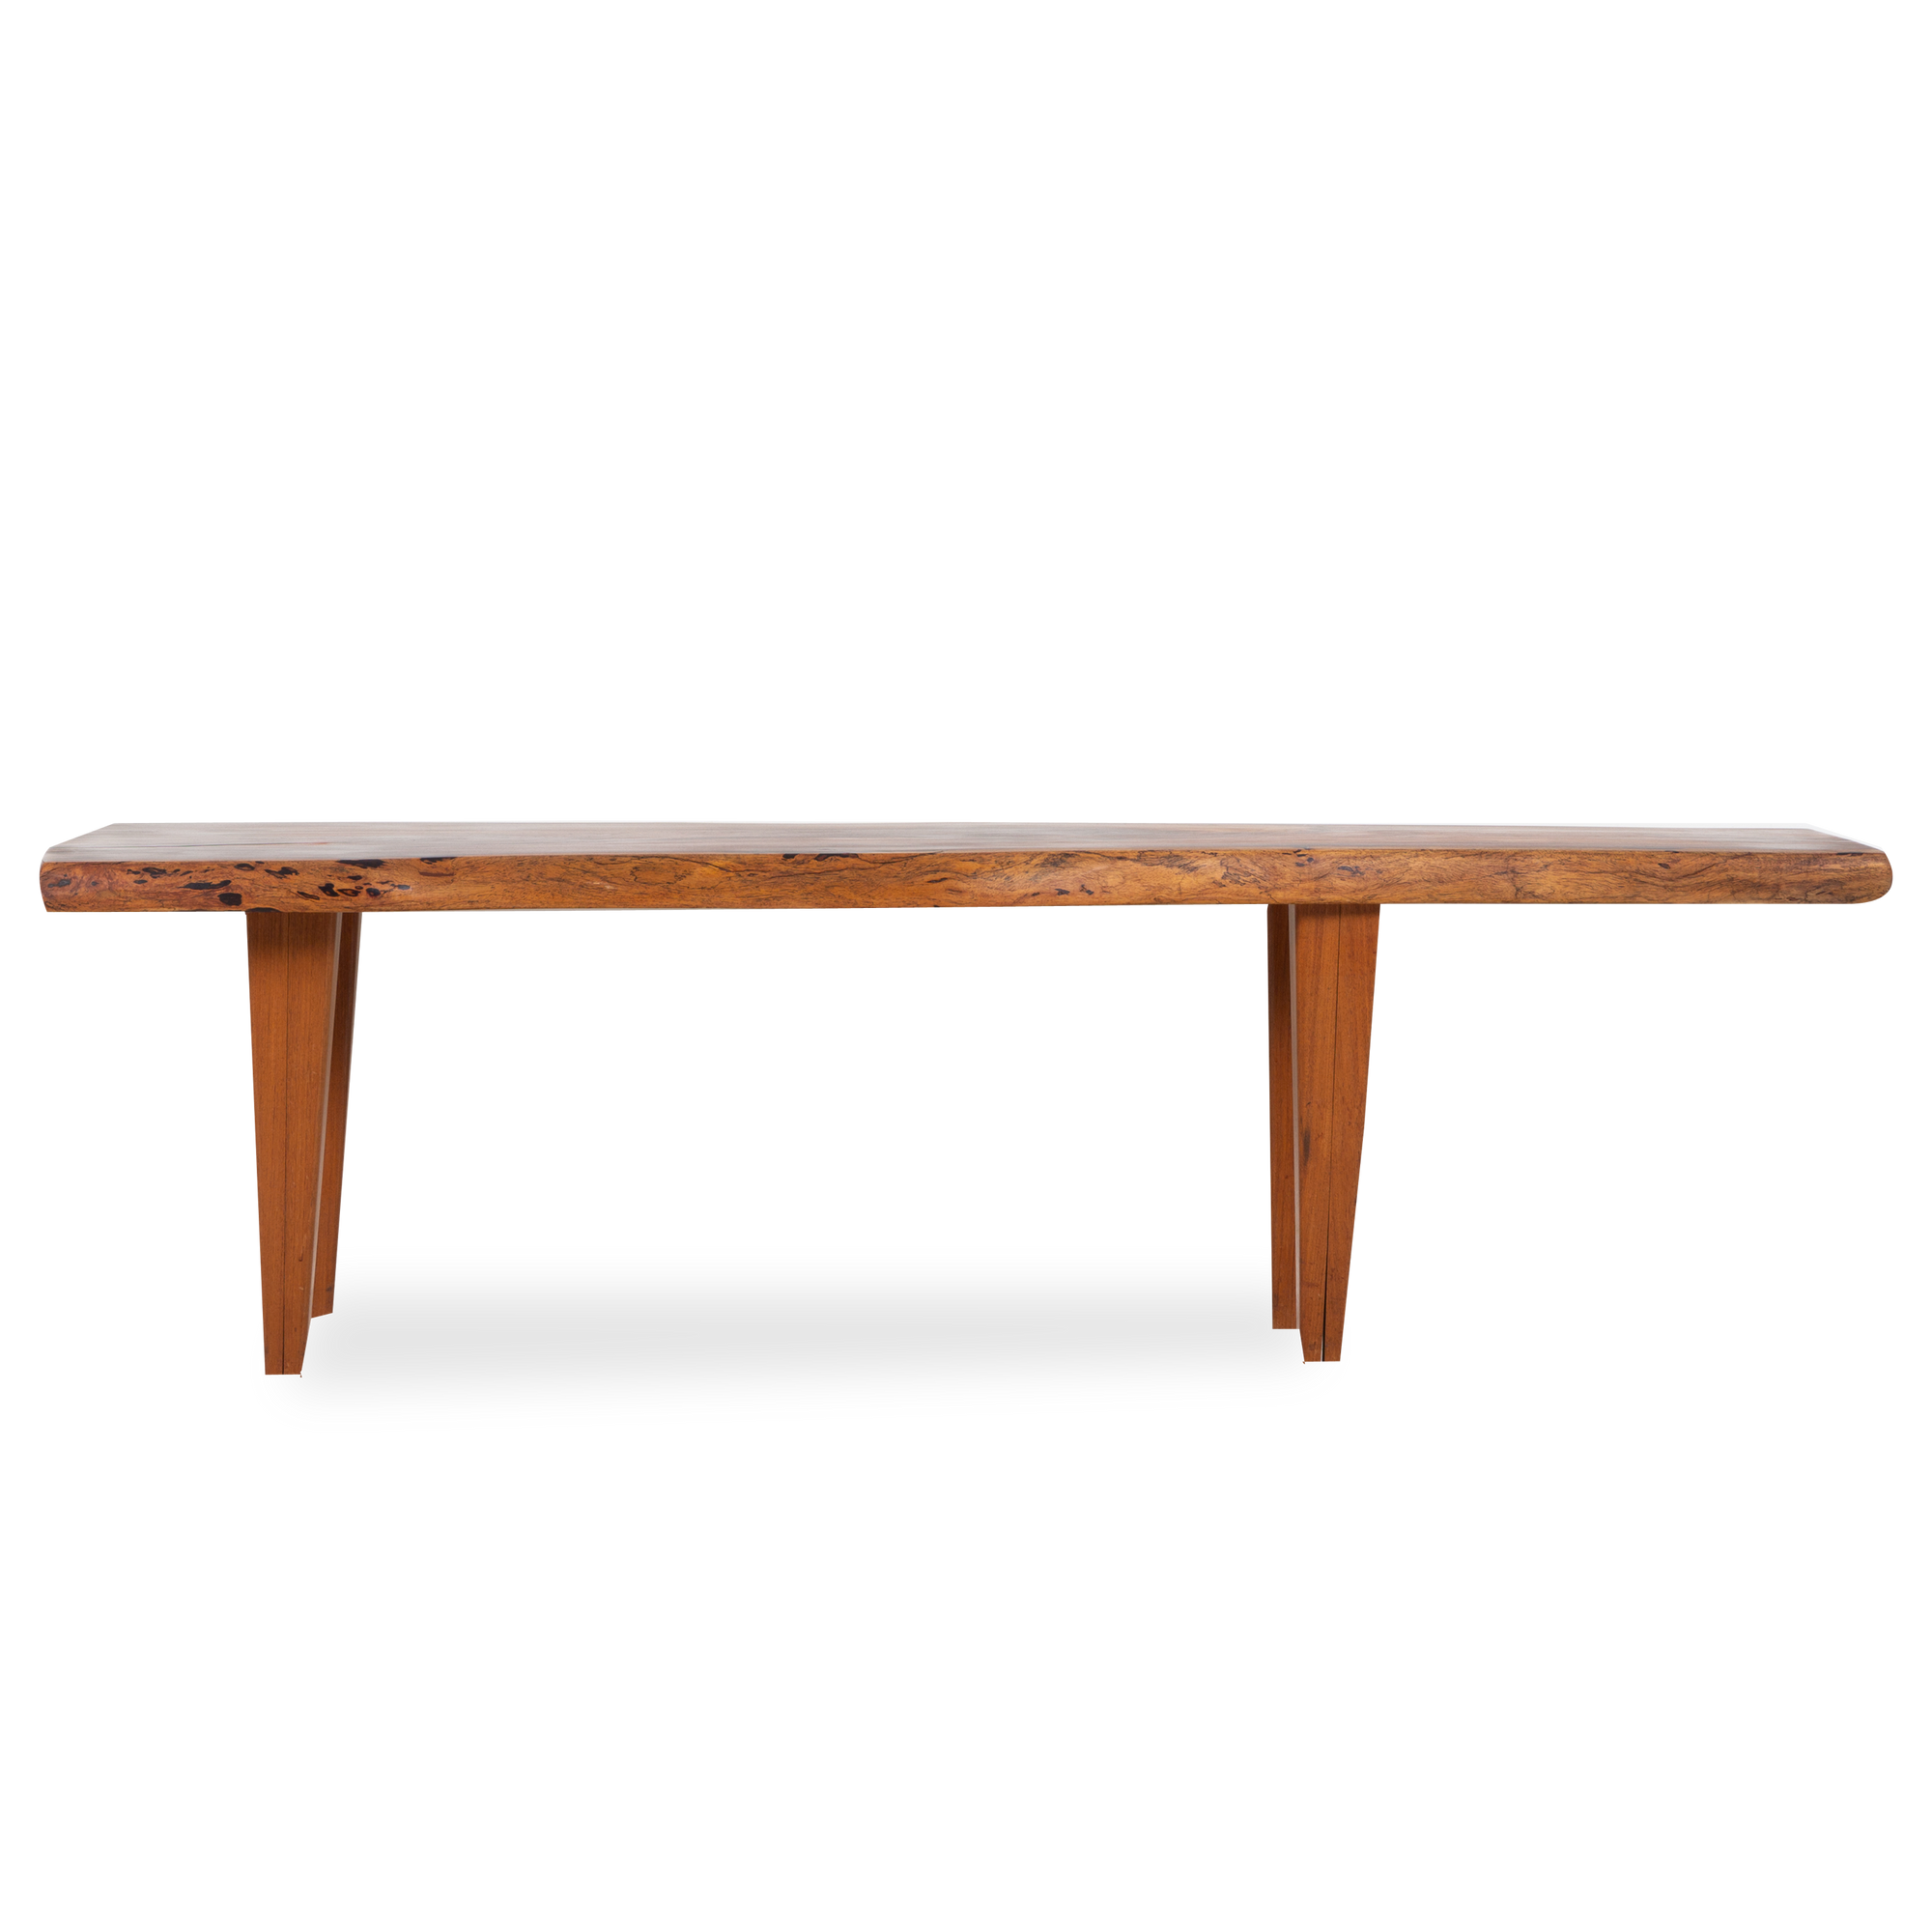 Rustically styled and finely crafted, this vintage plank coffee table was manufactured in Denmark, circa 1960s.